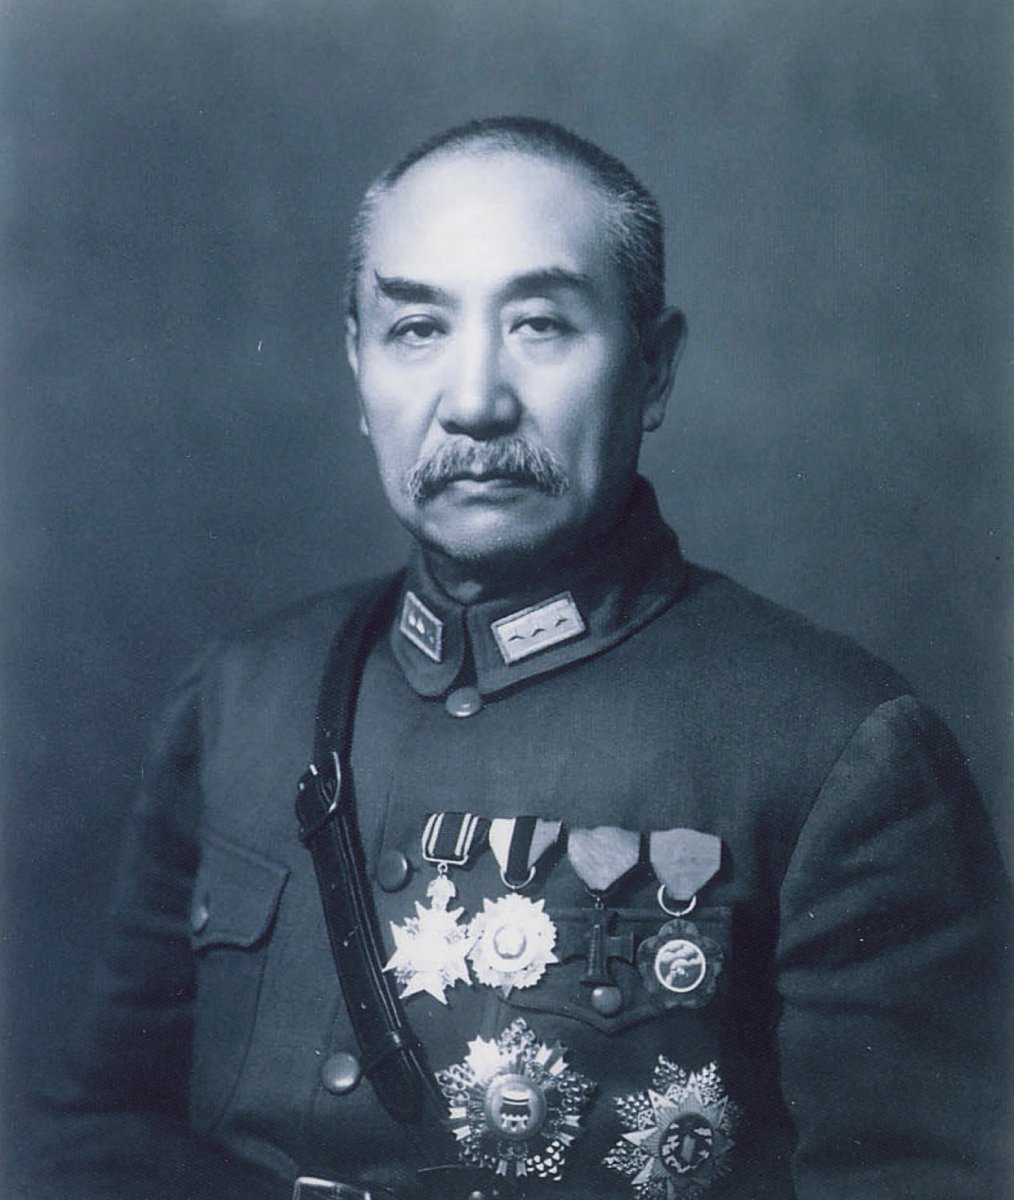 2) Yan Xishan, the ultimate Chinese warlord, who ruled his home province of Shanxi as a self-governing state within a state, who even recruited surrendered officers and soldiers of Imperial Japanese Army into his private army to defend against communists. Fled to Taiwan in 1949.